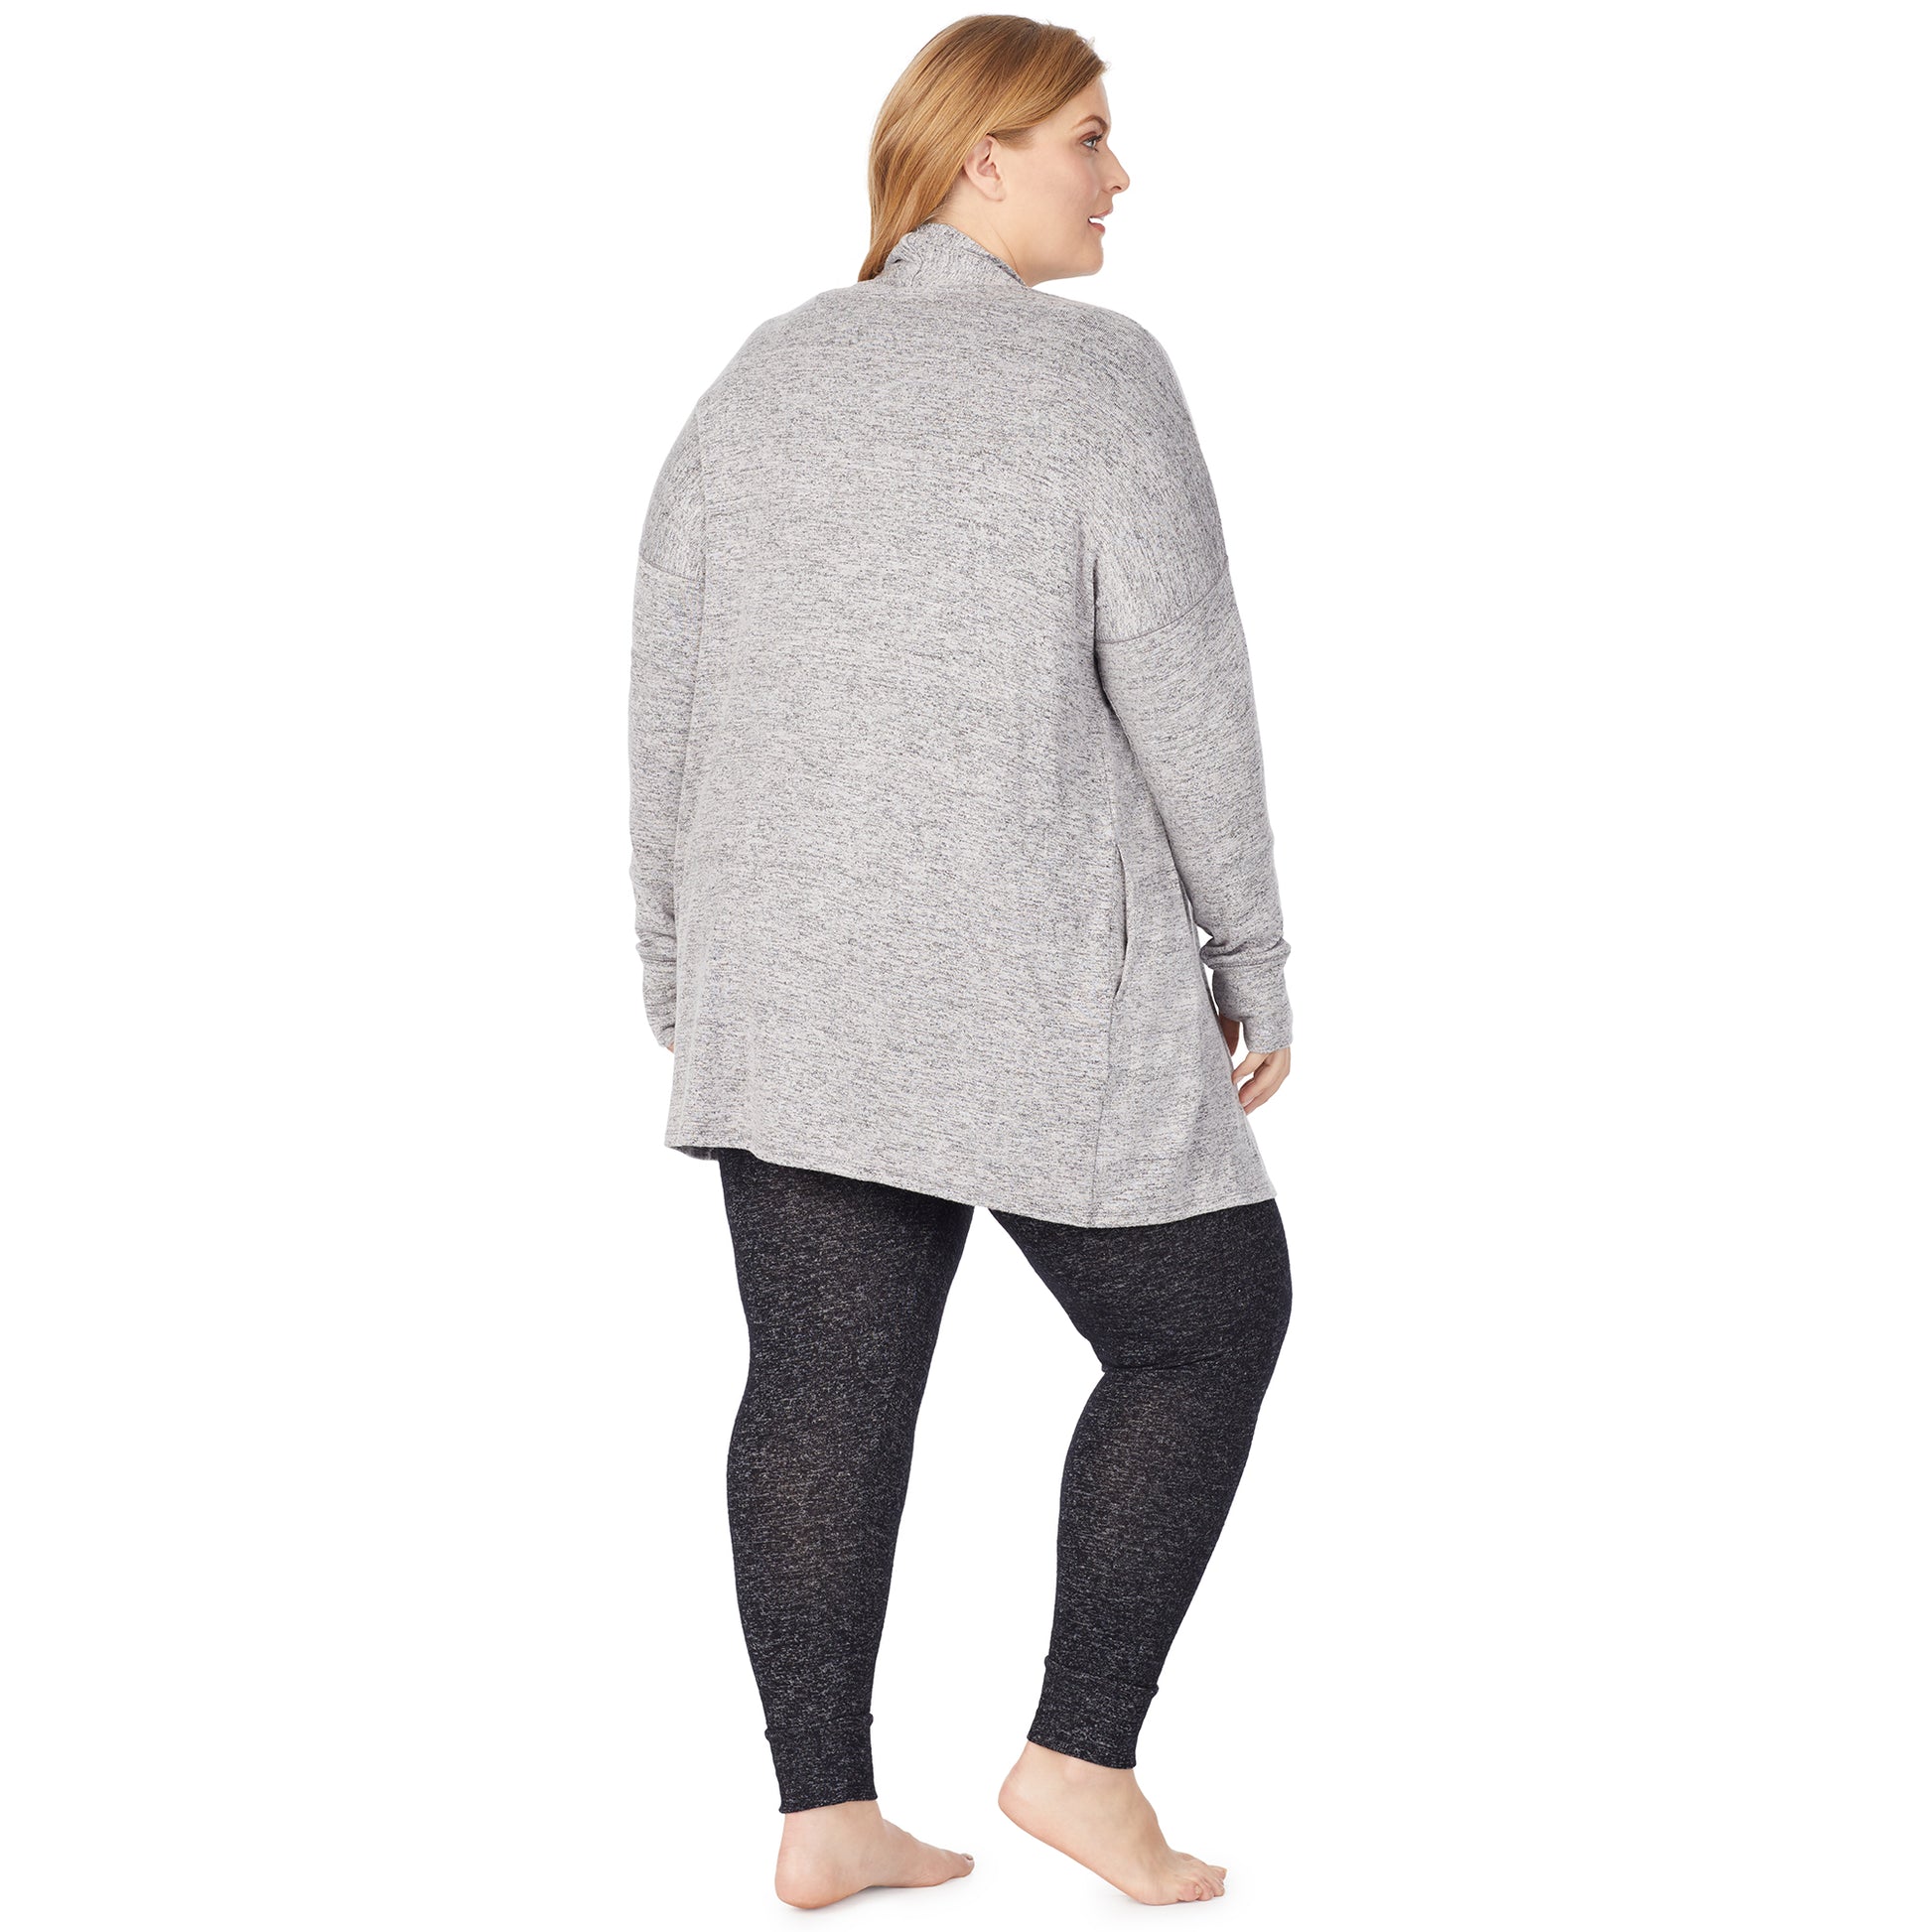 Marled Grey; Model is wearing size 1X. She is 5'9", Bust 38", Waist 36", Hips 48.5". @A lady wearing a marled grey long sleeve wrap plus.